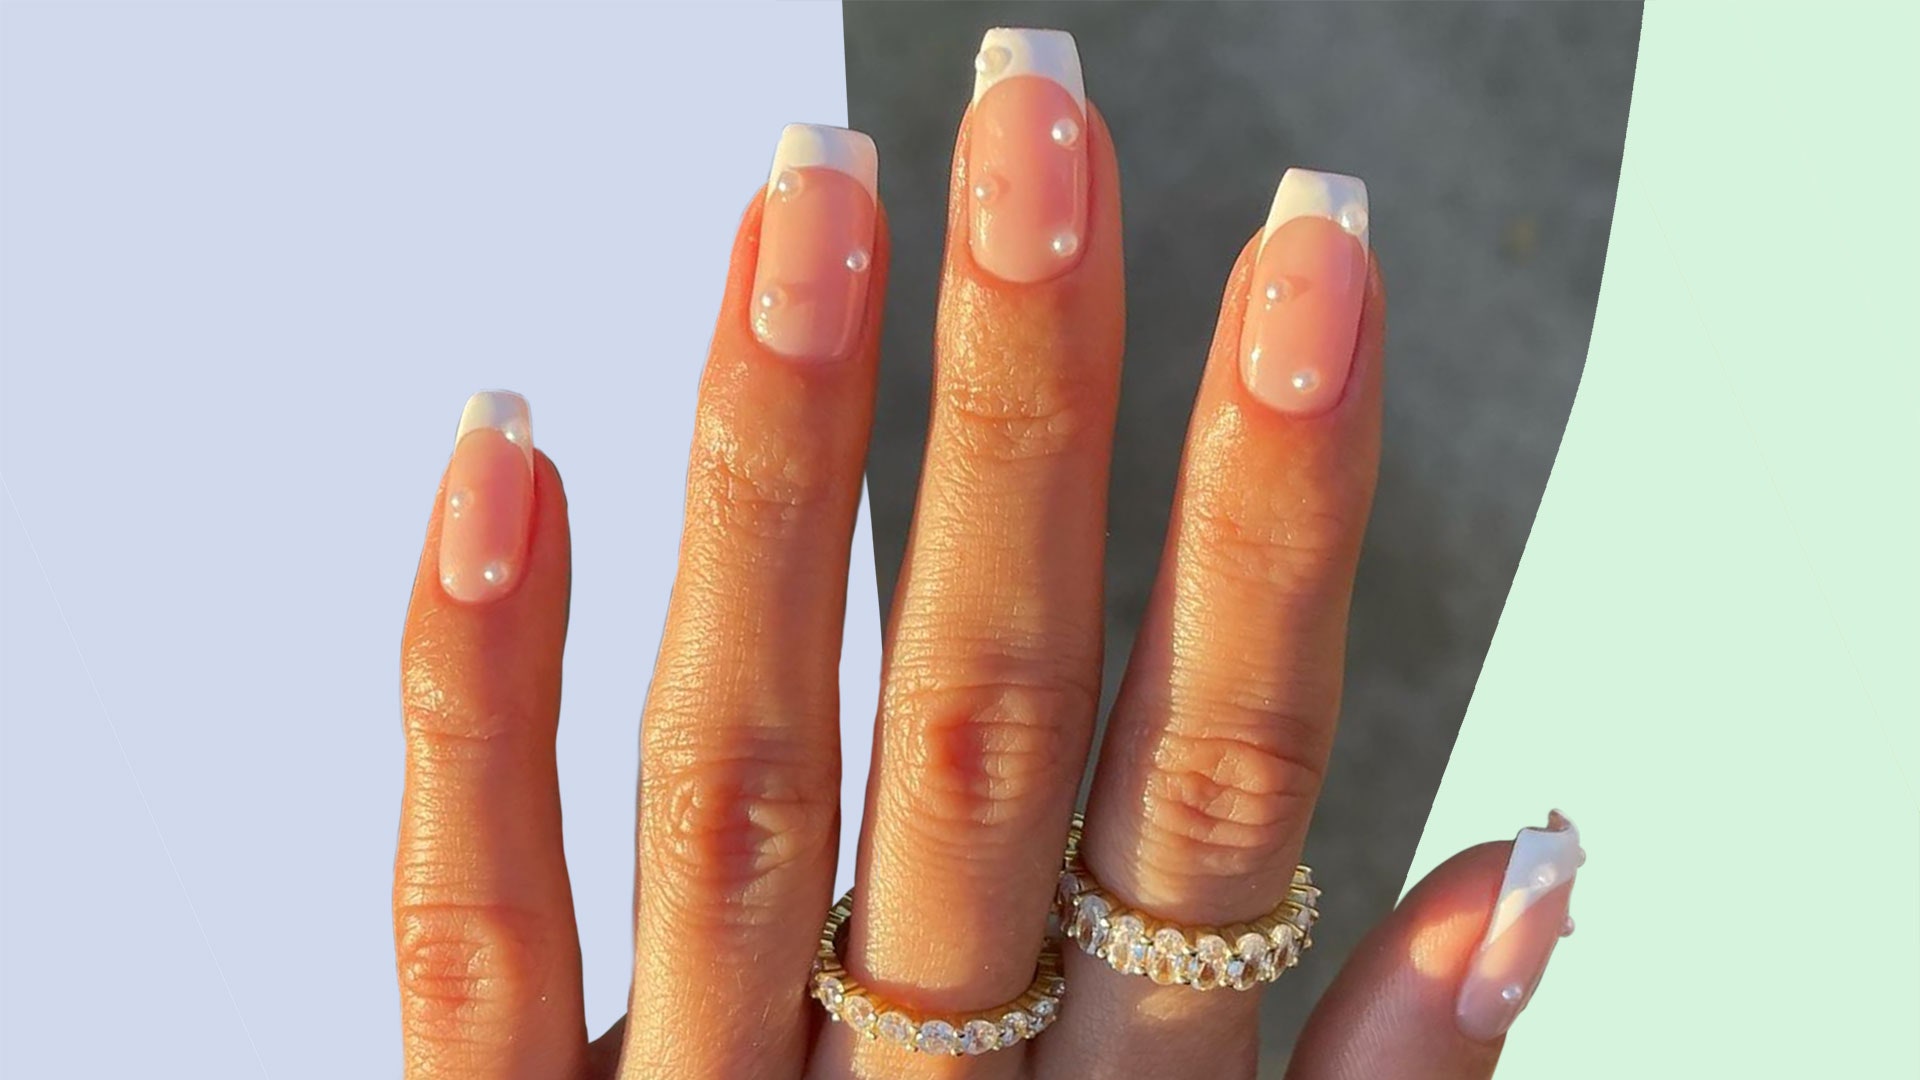 4. Nail designs with jewels and pearls - wide 4